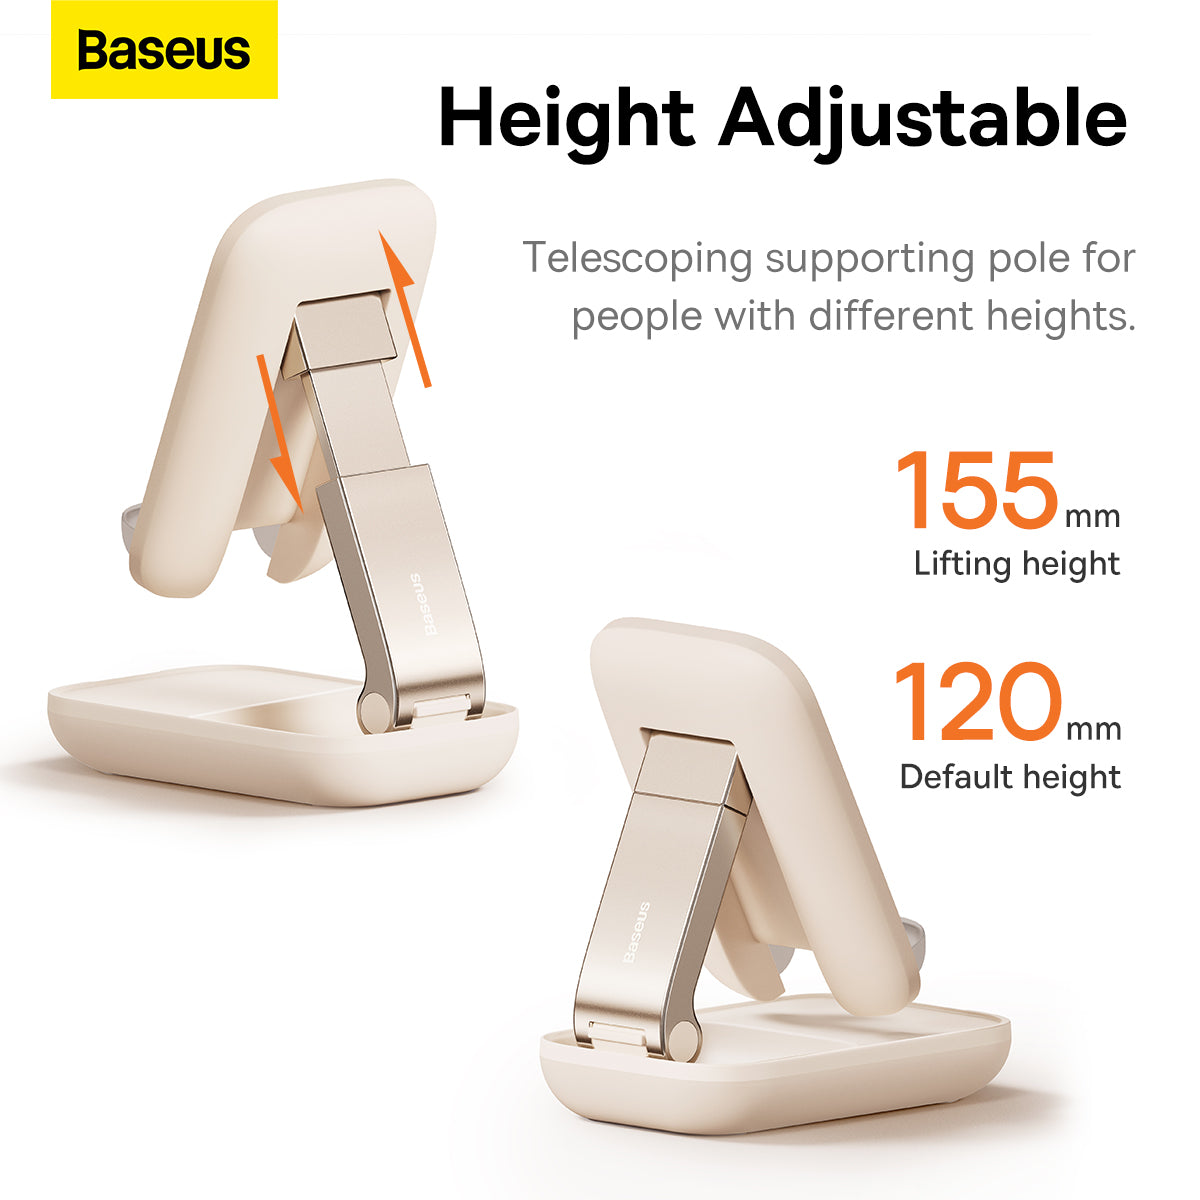 Baseus Seashell Series Folding Phone Stand with Built-In Mirror